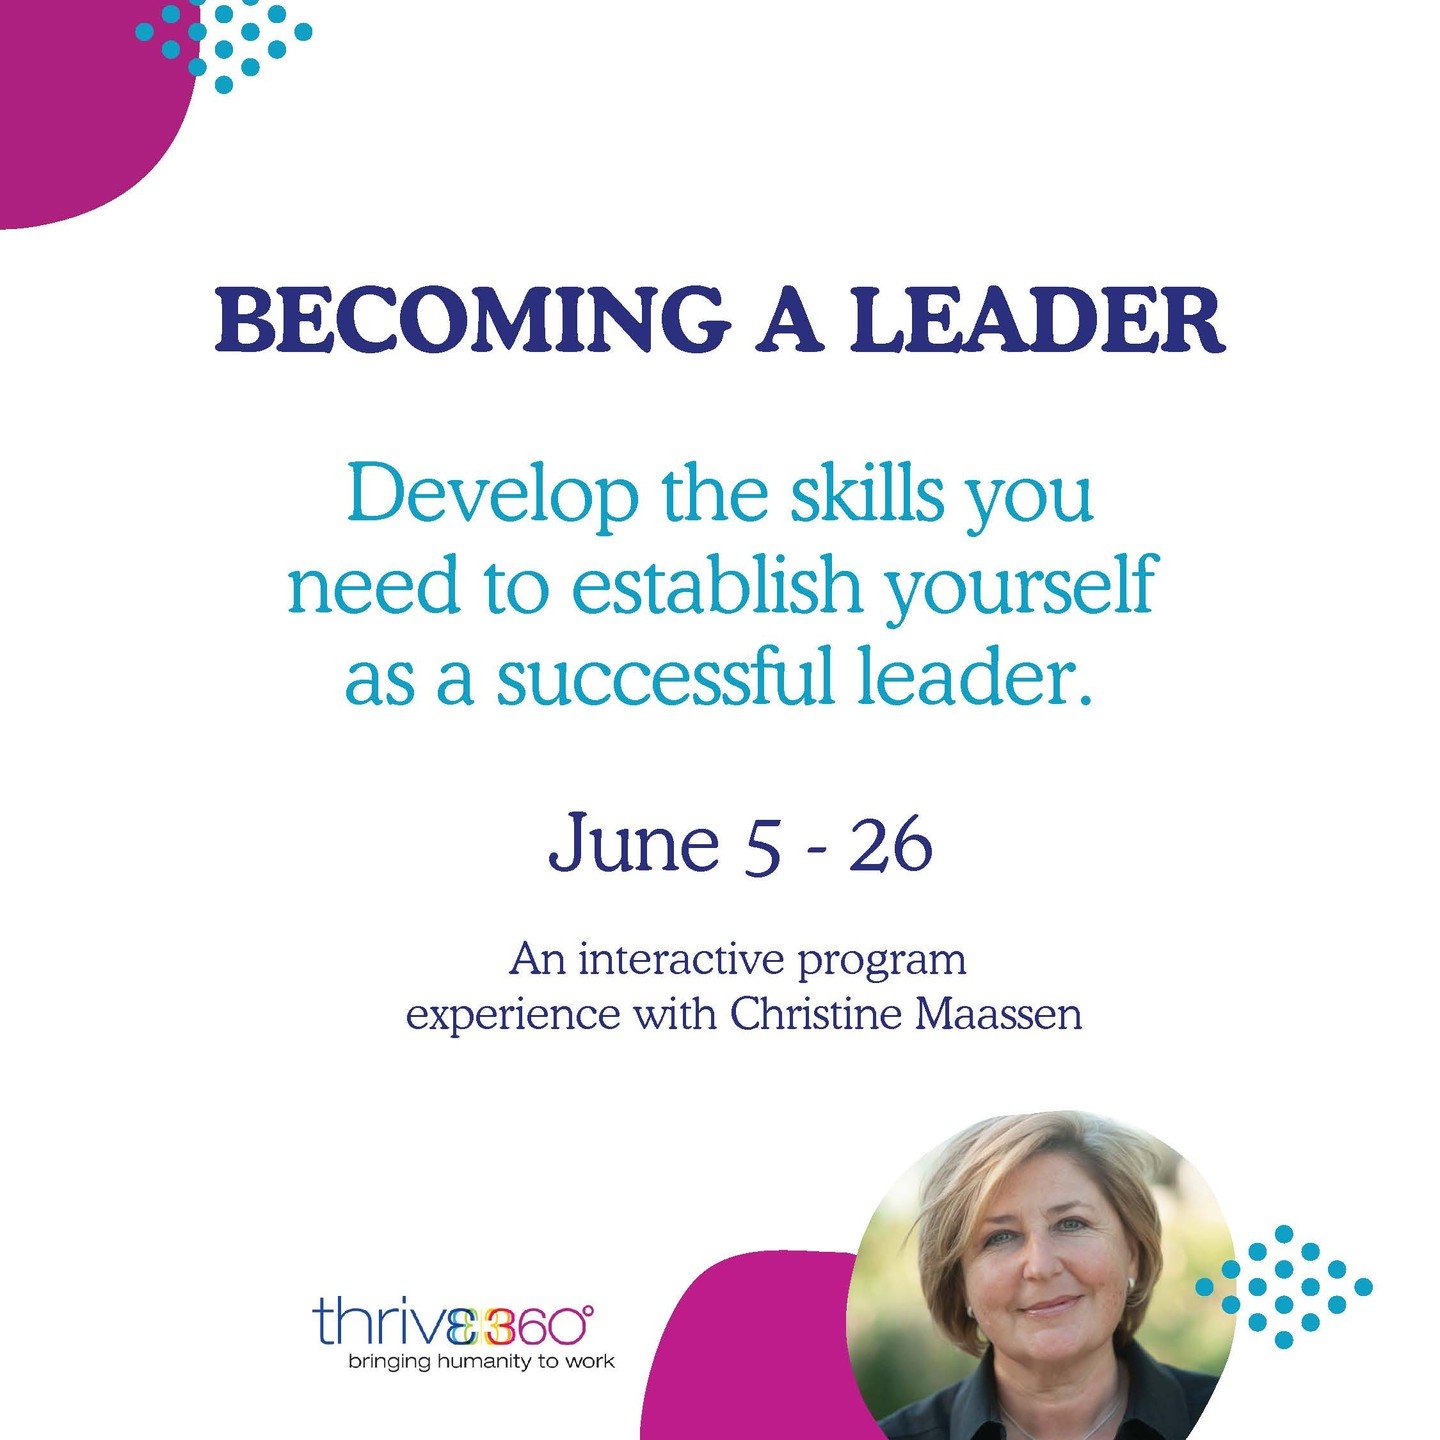 Exciting to announce our new program! Debunk common leadership myths and become the leader you aspire to be. Join our &quot;Becoming a Leader&quot; course and gain the skills, insights, and confidence to lead with impact. Early bird pricing available